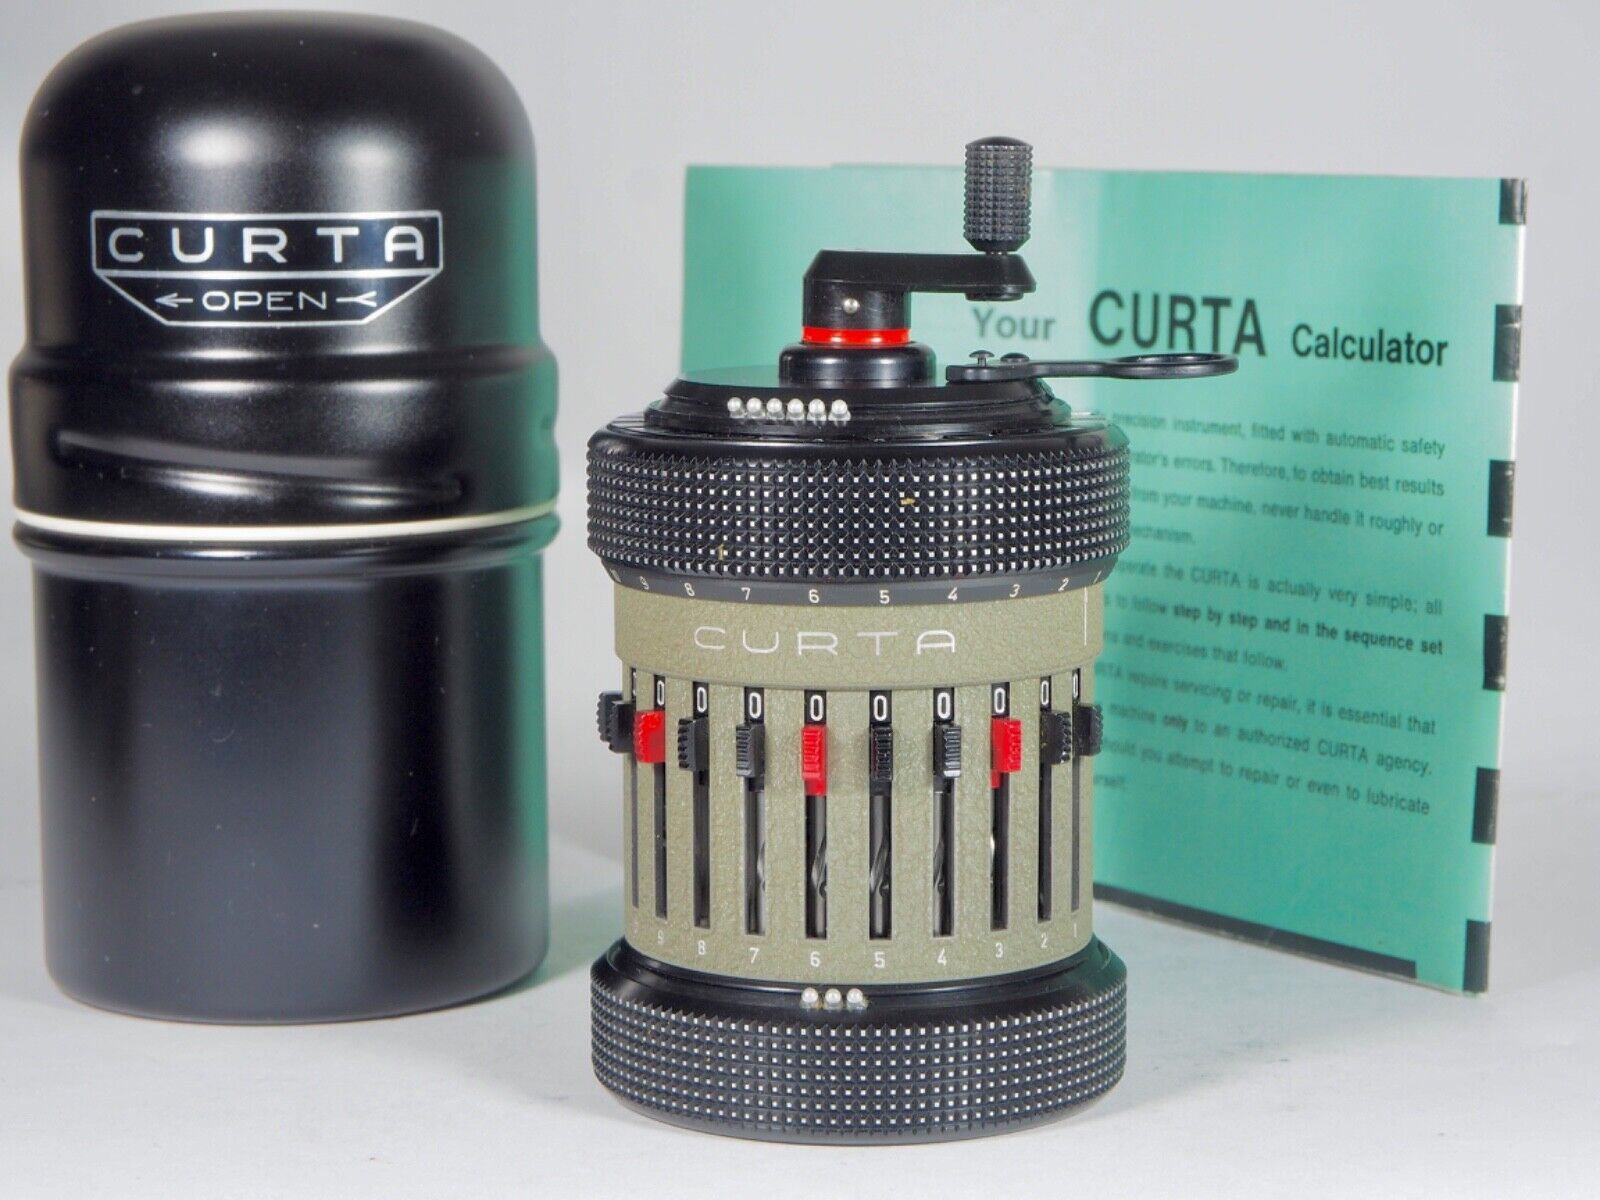 Mint Curta Calculator 1963 Type 2 w/can, manuals likely unused, perfect function